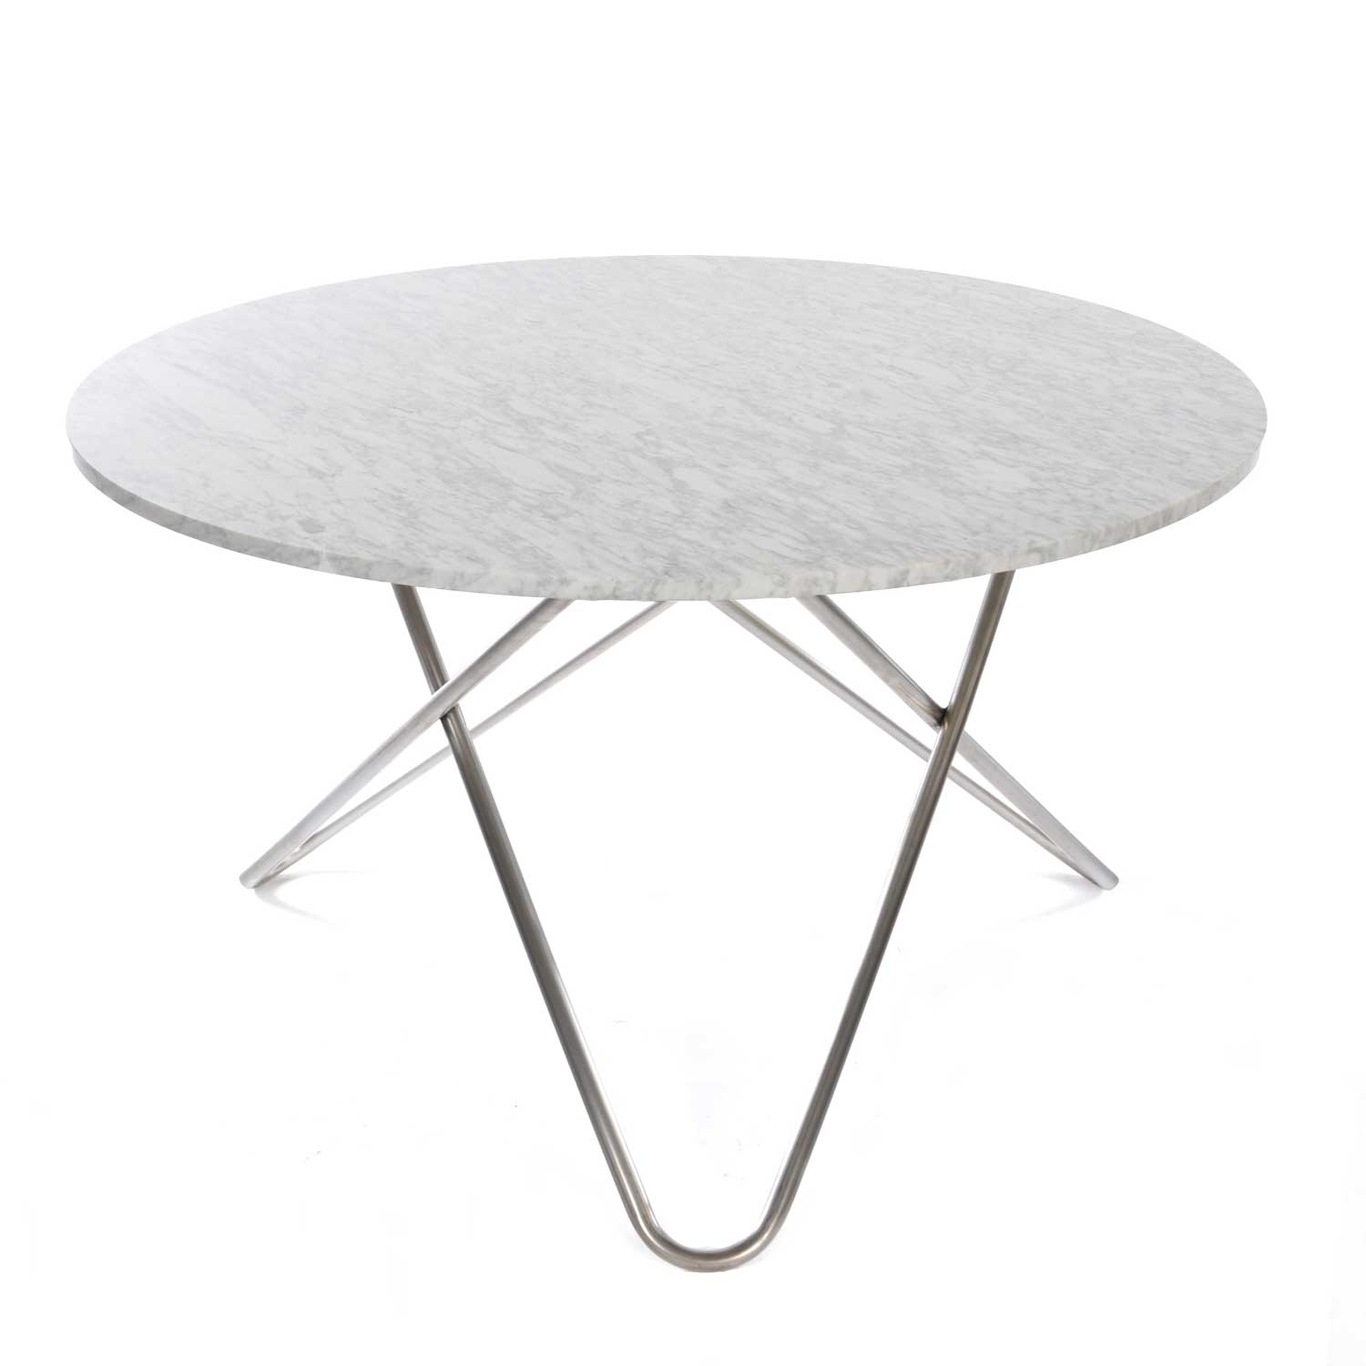 Big O Dining Table, Steel frame/White marble